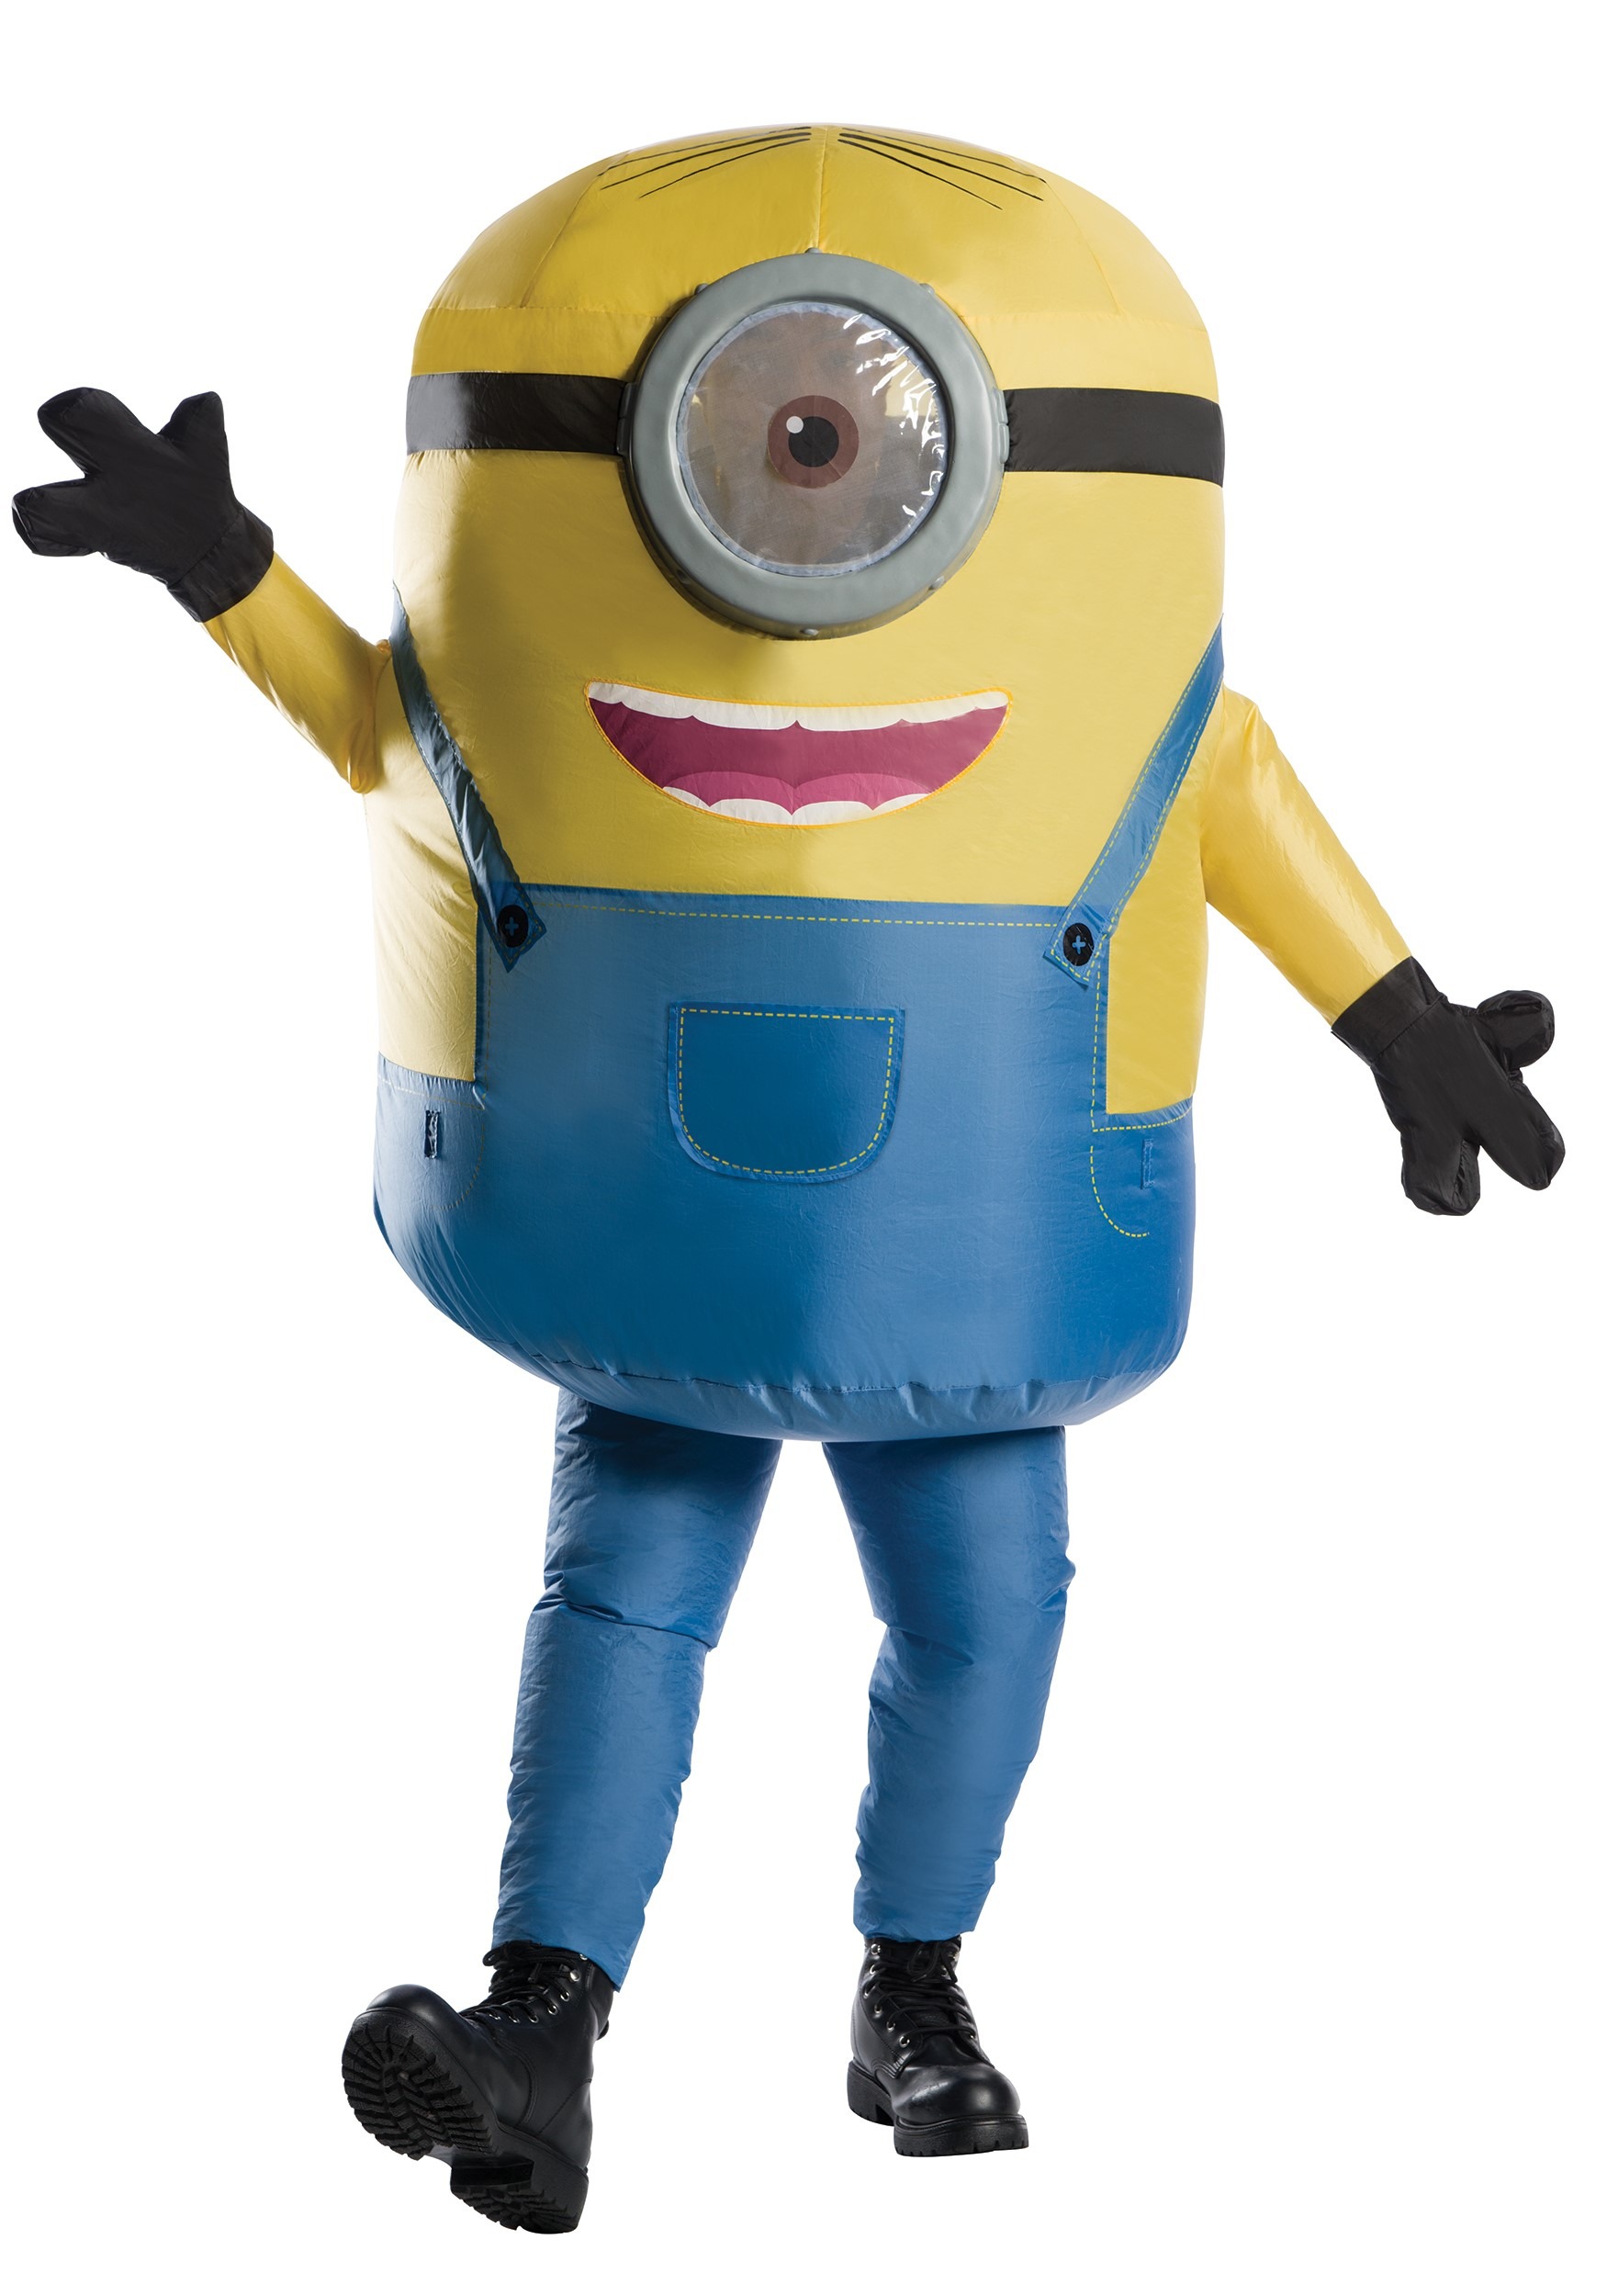 DIY Minion Costume for Grown-Ups (But Works for Kids Too!) - Thrifty Jinxy